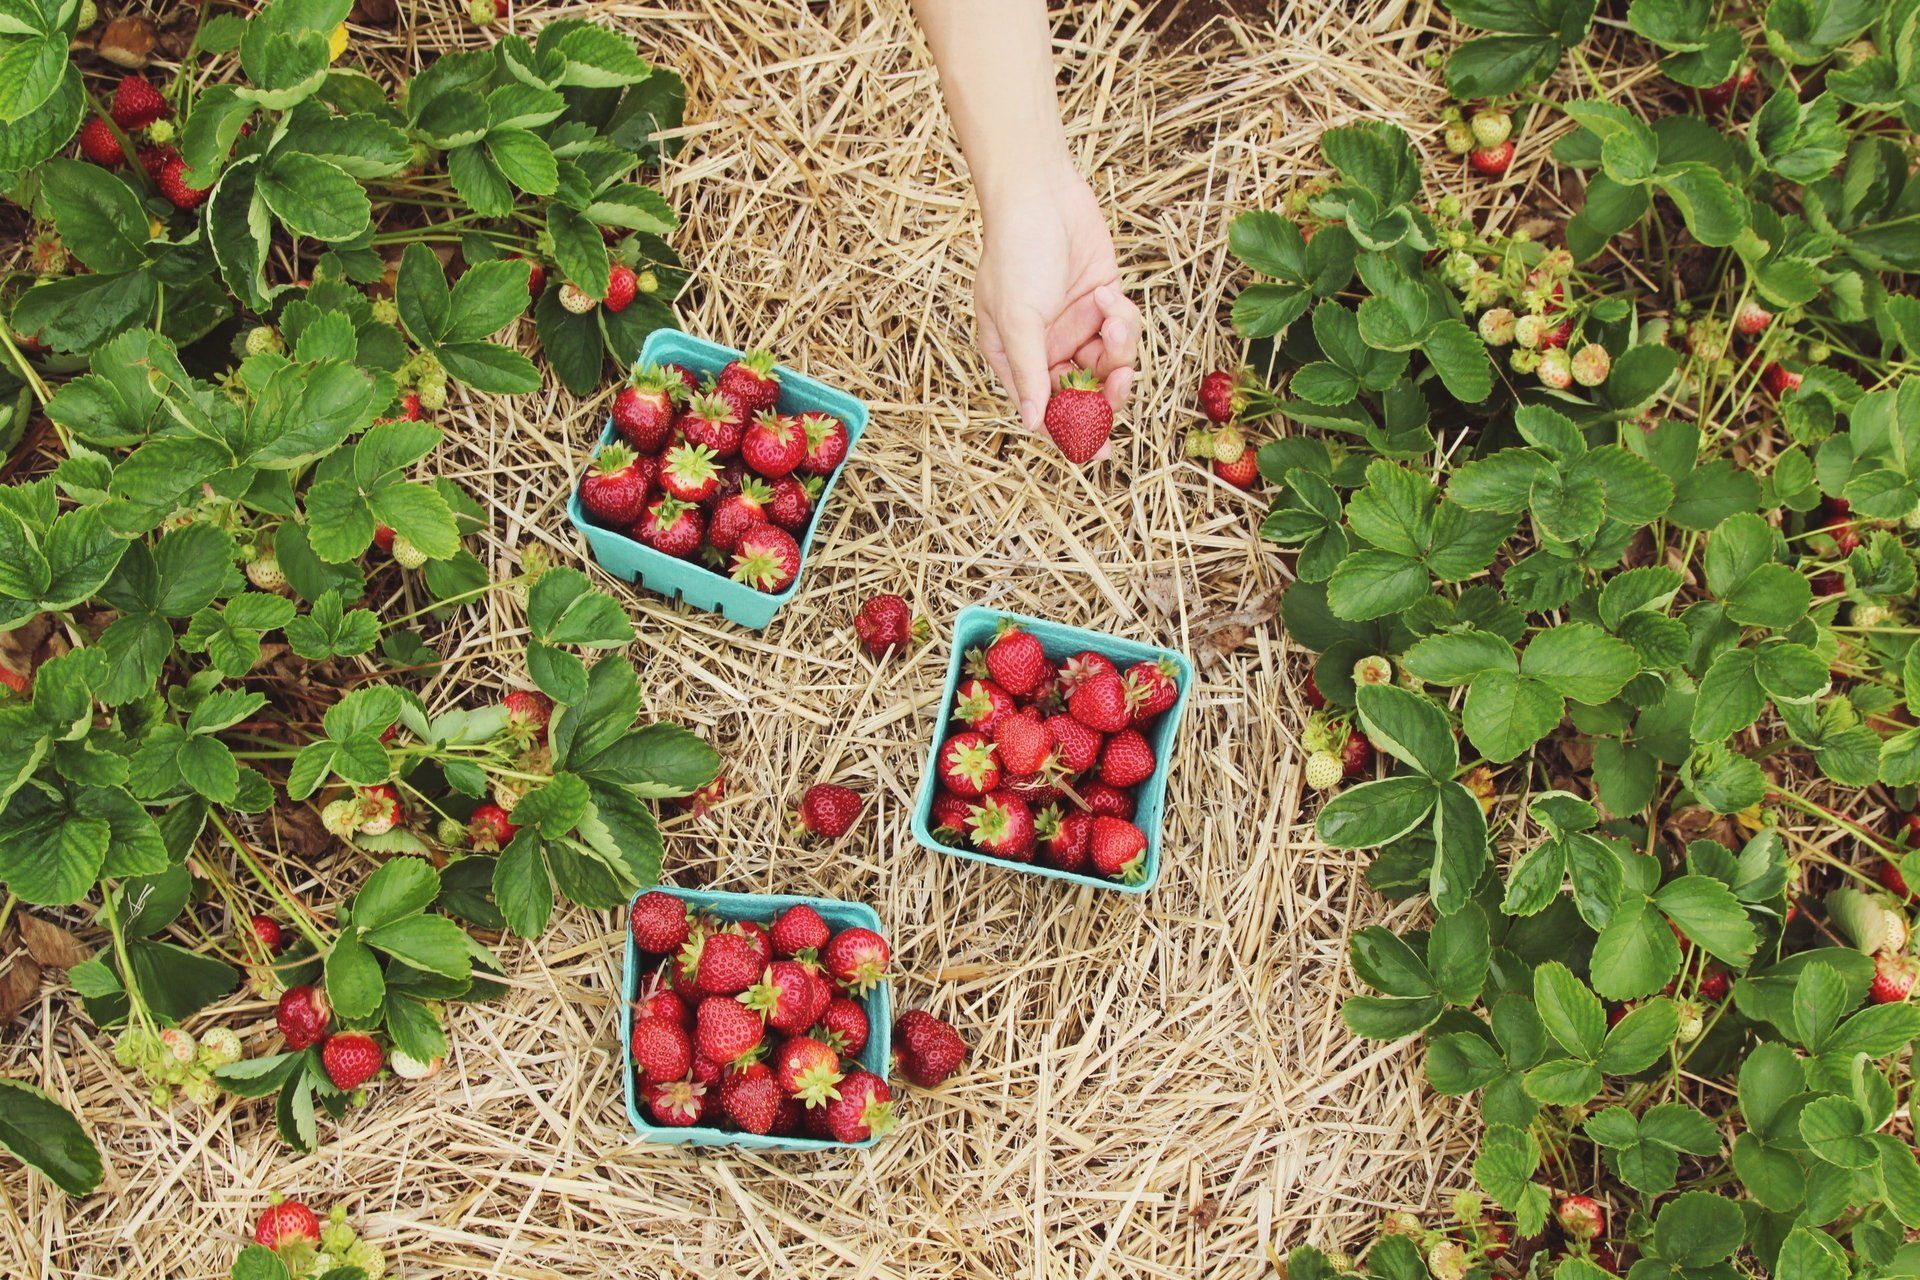 a person picking strawberries in a field with three baskets of strawberries